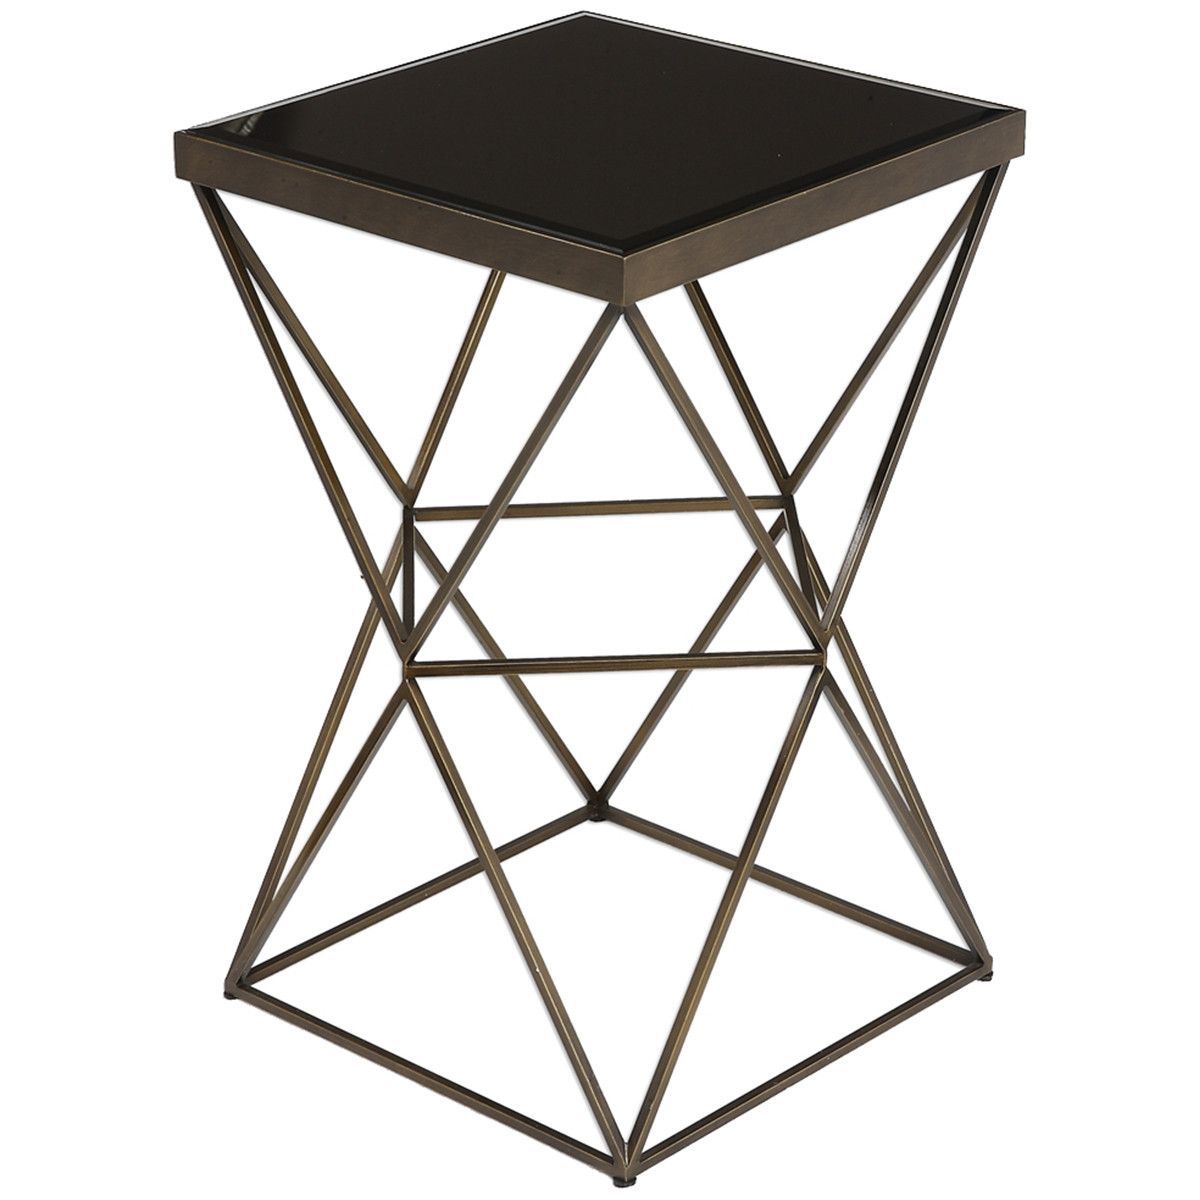 uttermost uberto steel accent table storage design and rubati college room ideas large round end retro look furniture small desk with drawers diy rustic coffee tennis blue